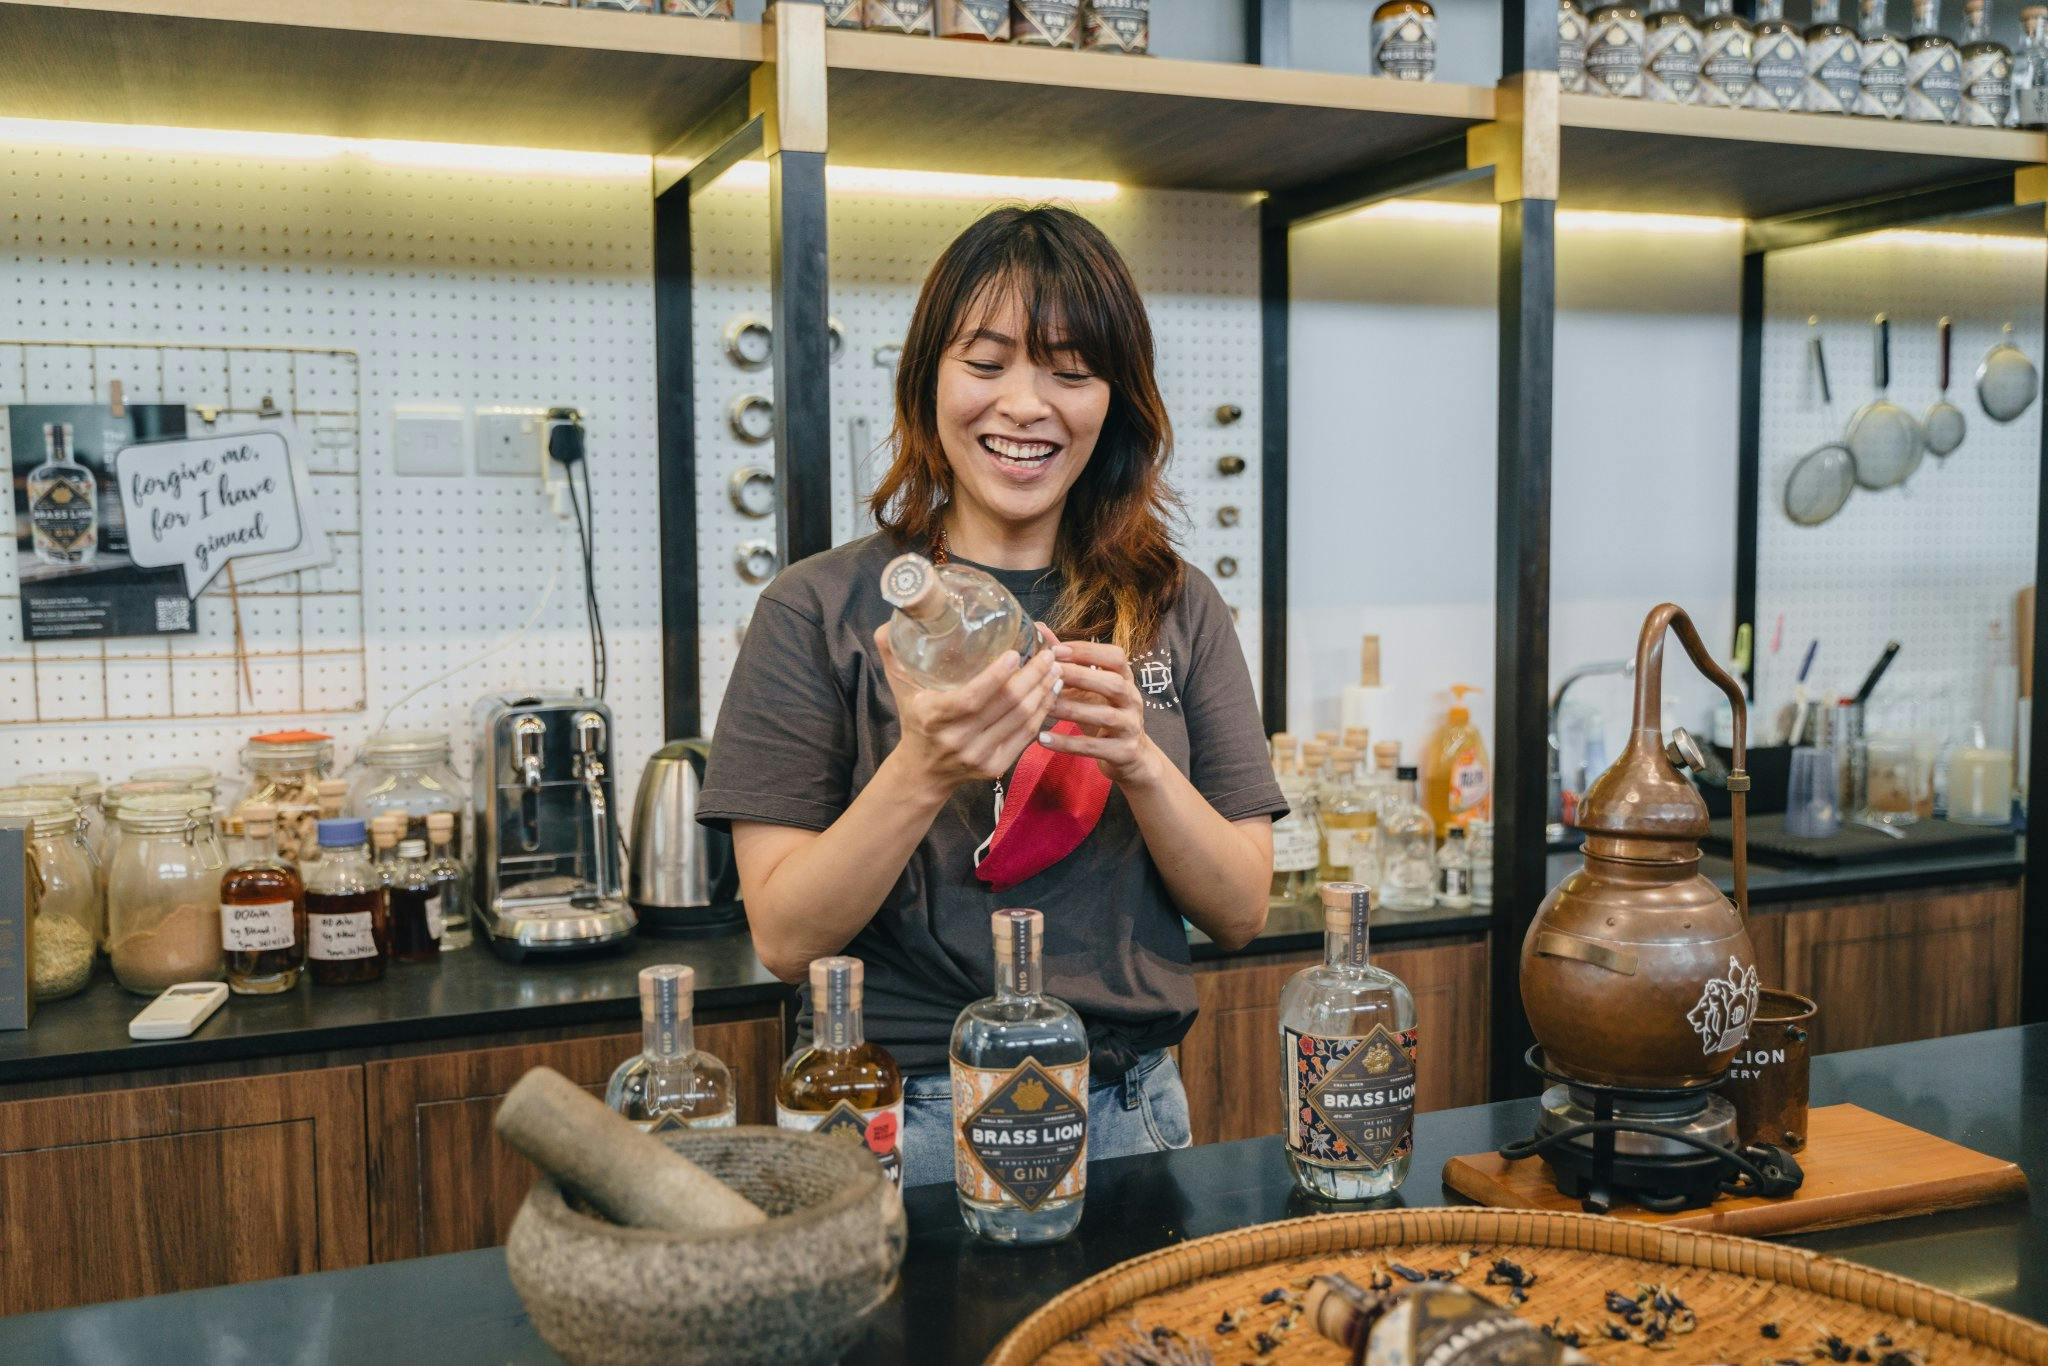 Learn gin making at Asia's first gin school!